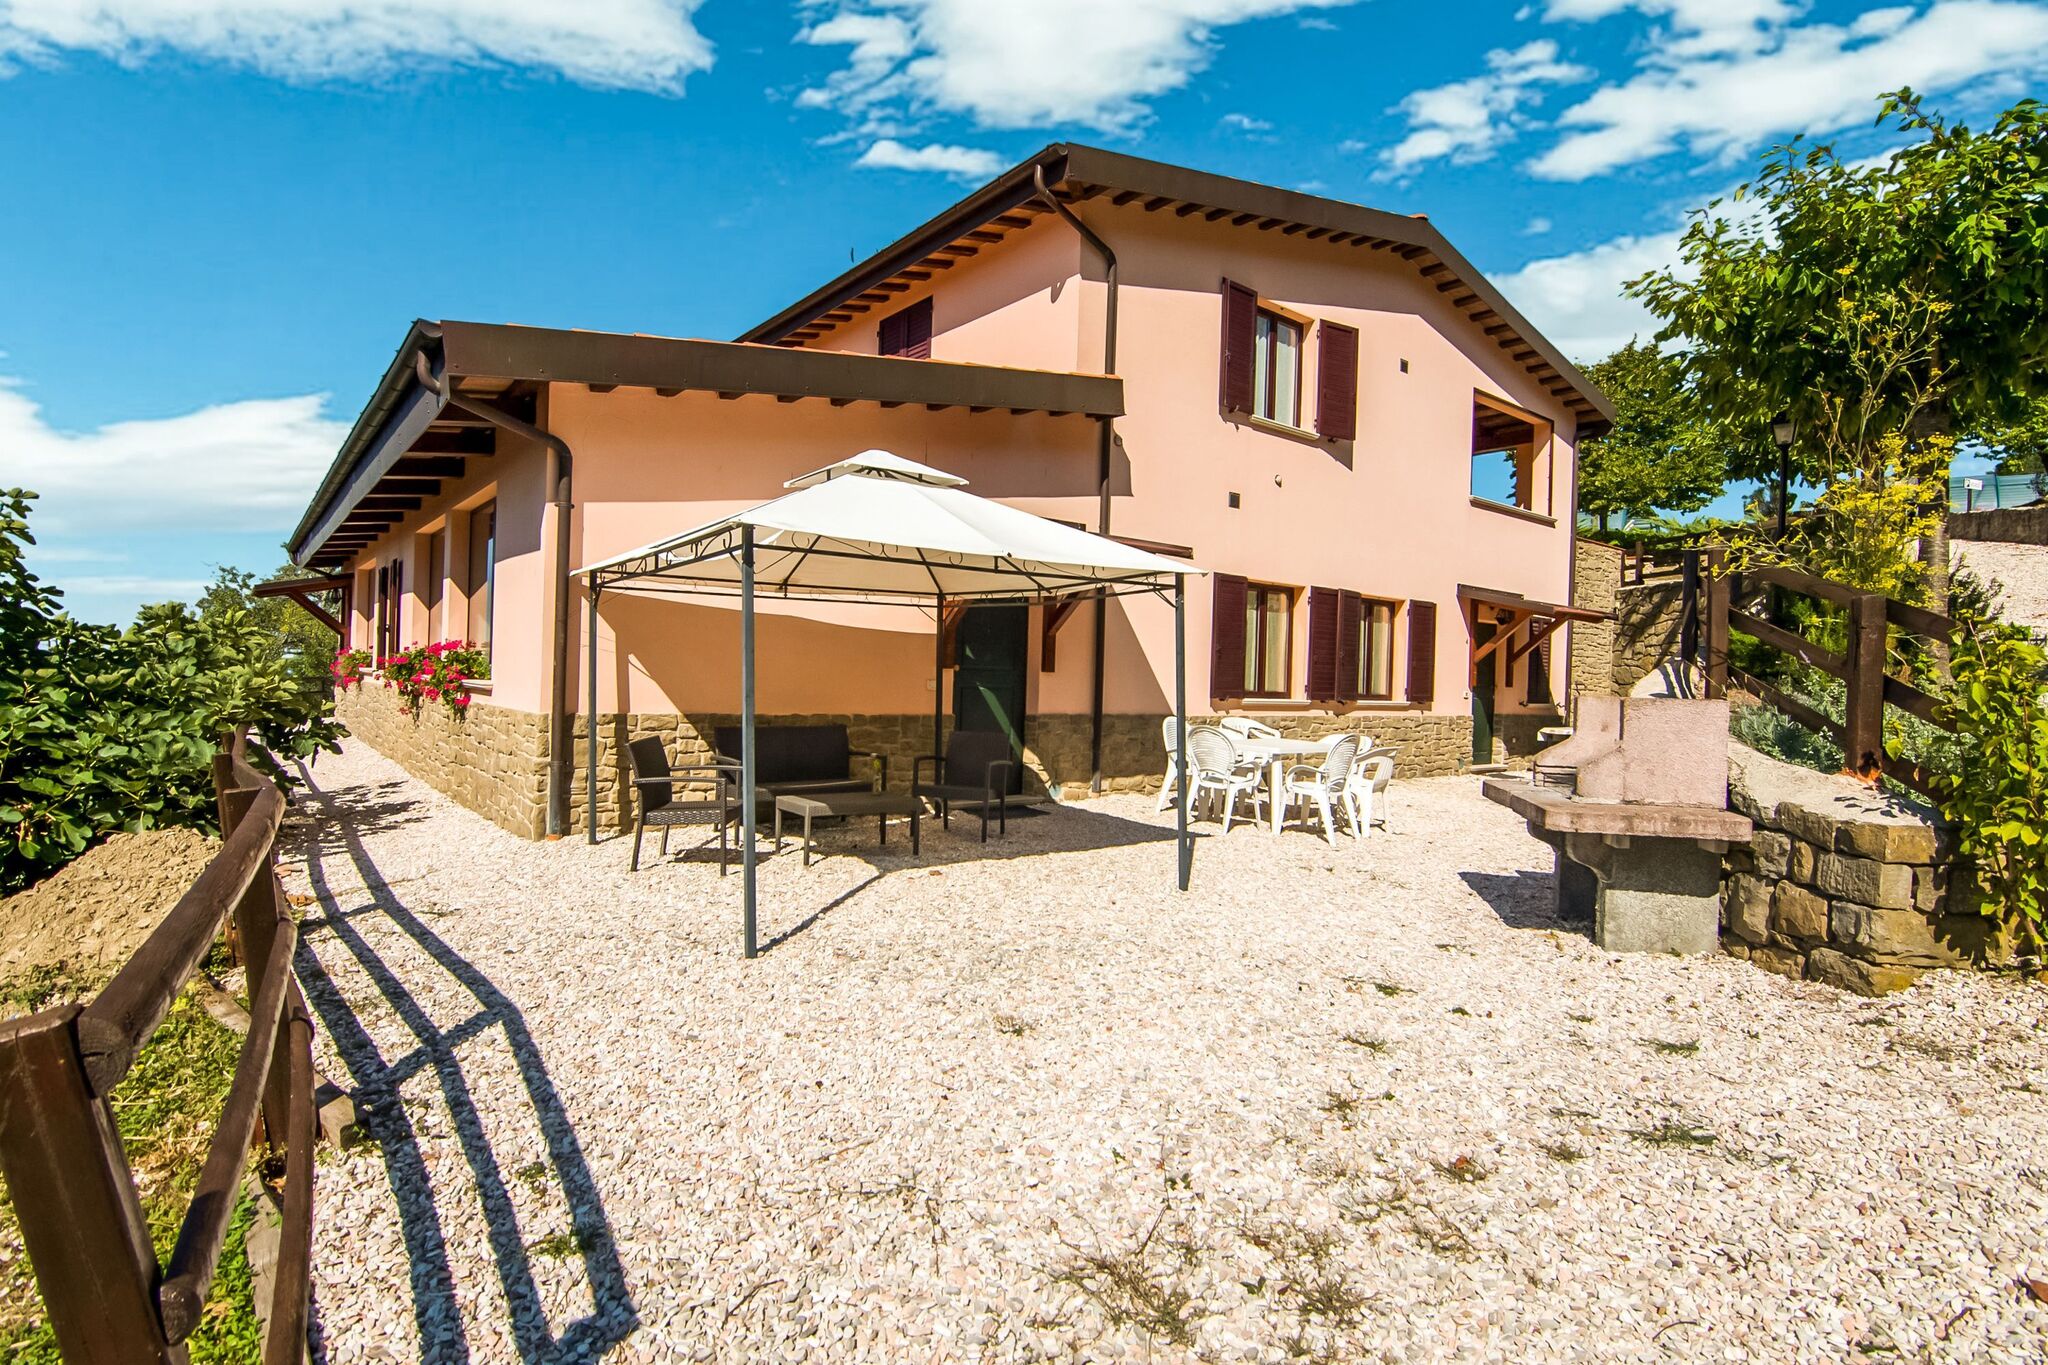 Agriturismo in the Appenines with covered swimming pool and bubble bath